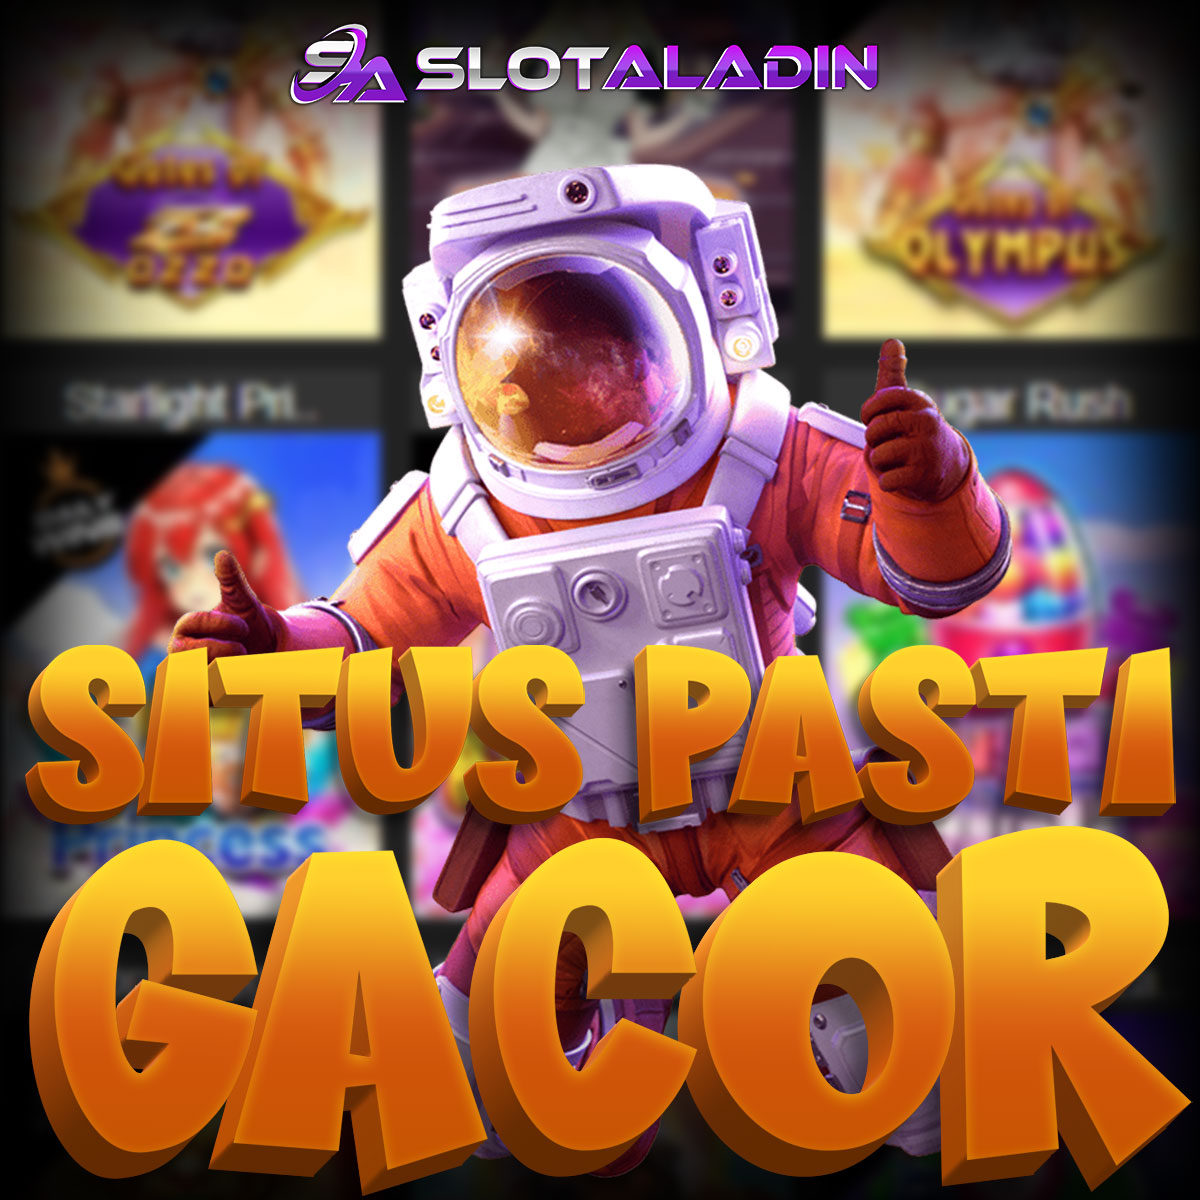 SLOTALADIN - The Best Perfomance for Gaming in Indonesia